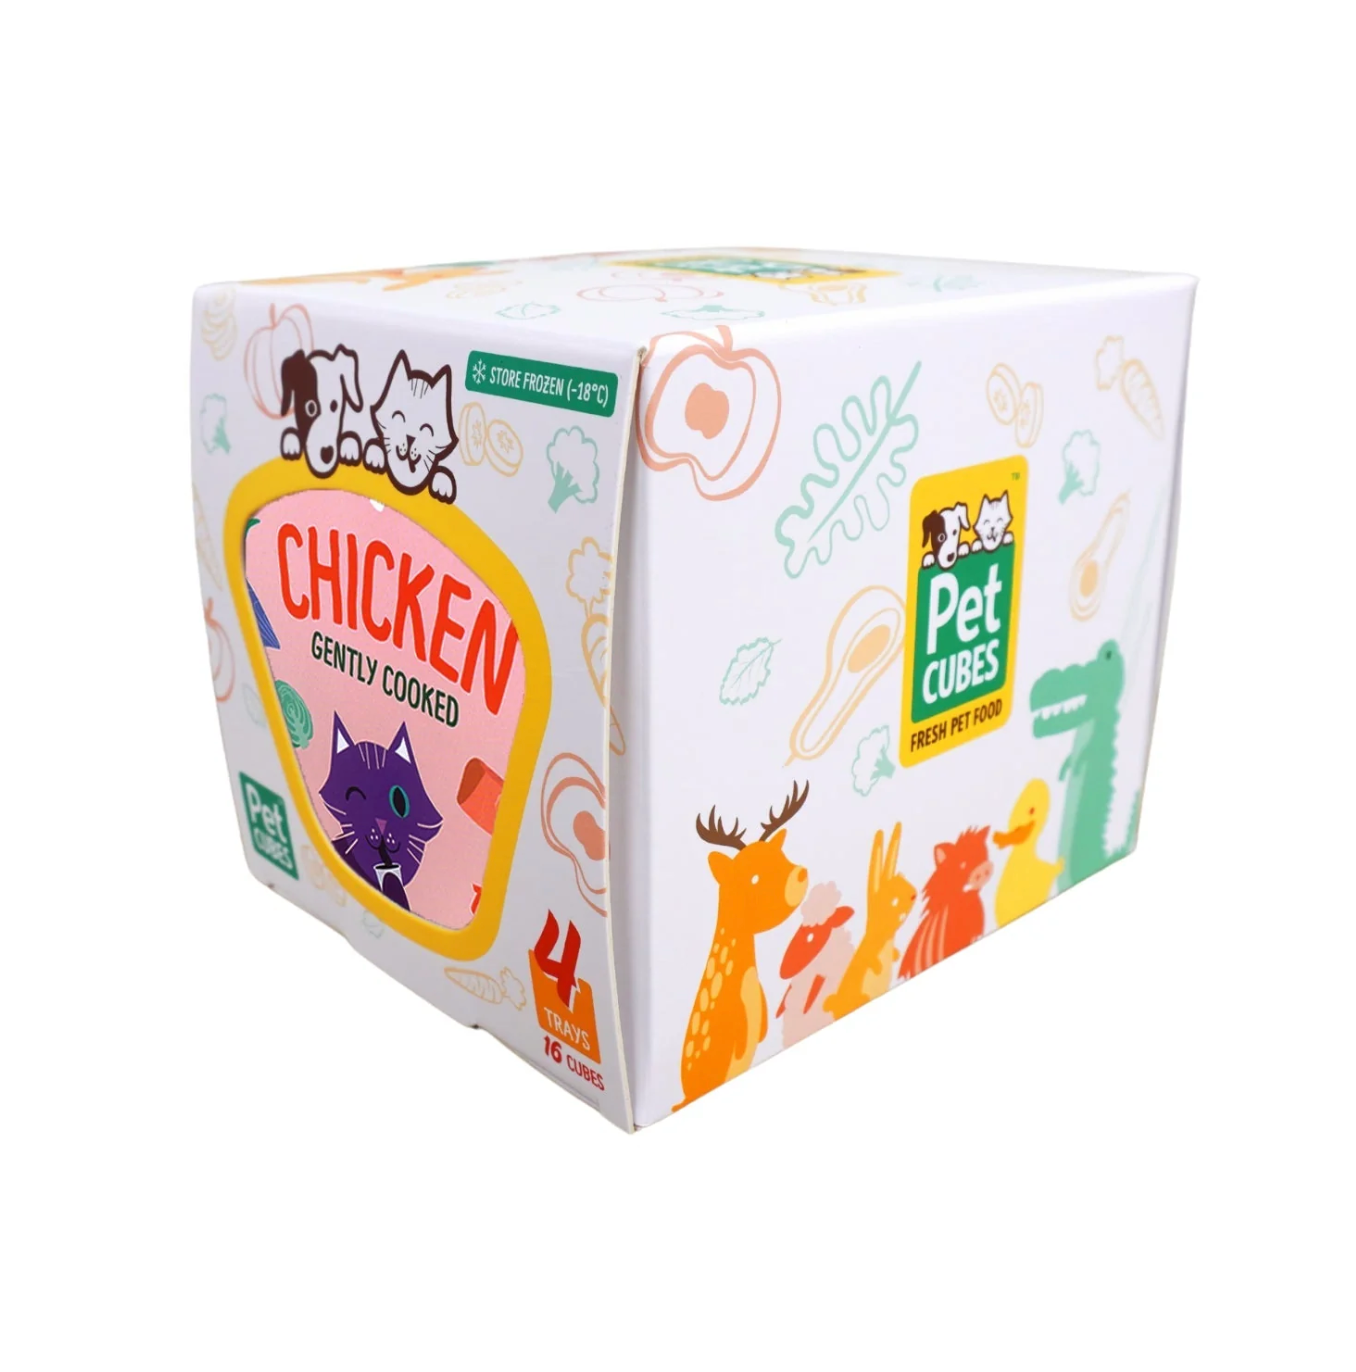 PetCubes Gently Cooked Chicken Cat Food – 1 Case